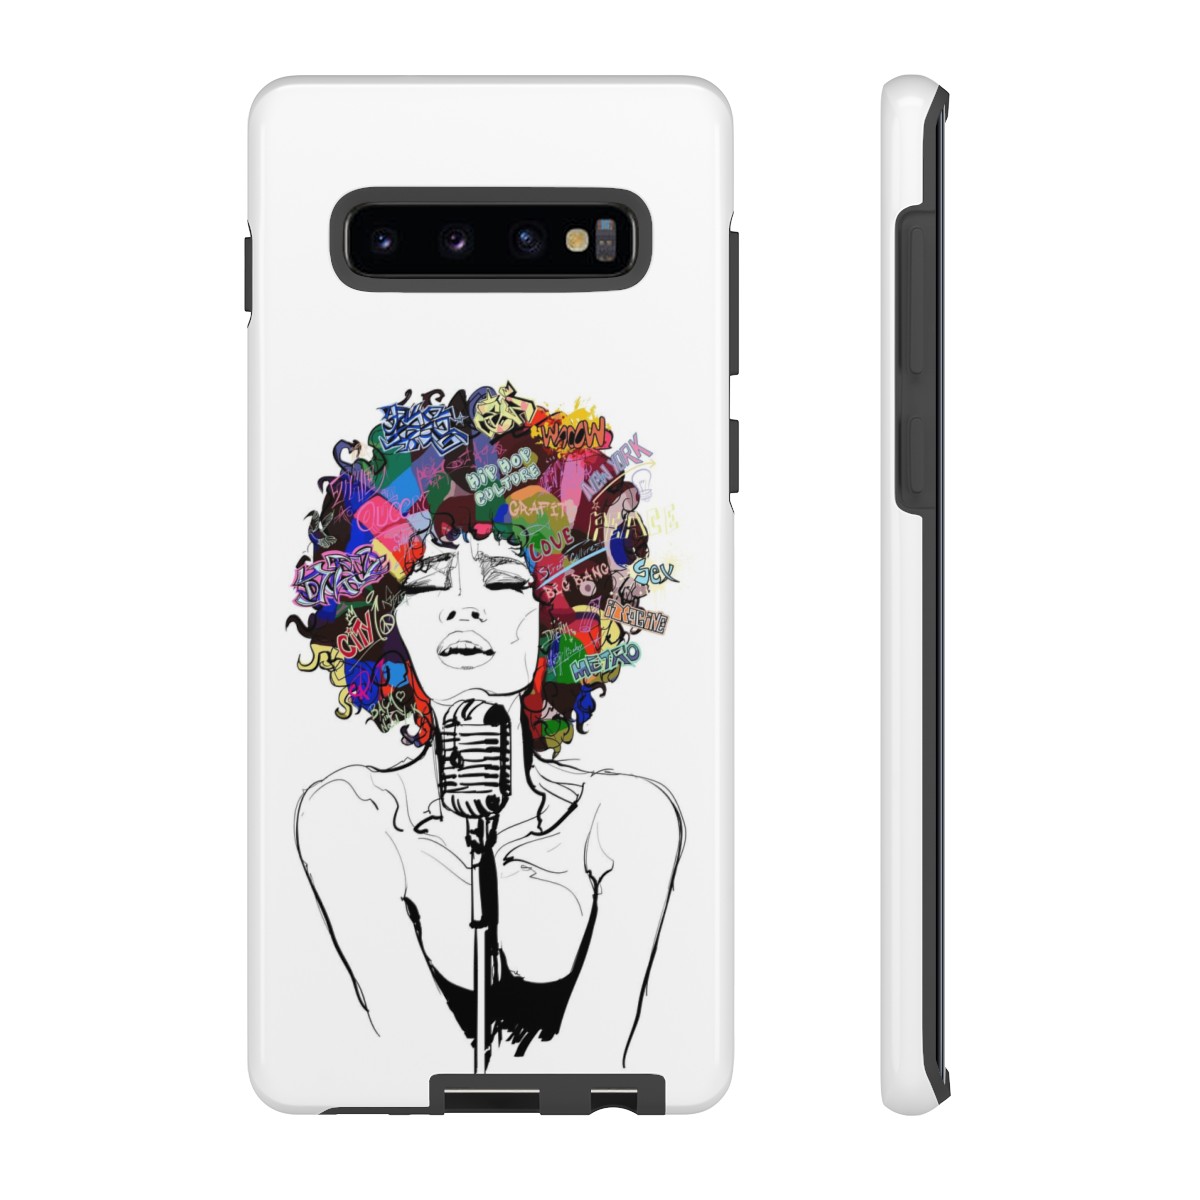 Phone Cases Woman with Thoughts product thumbnail image